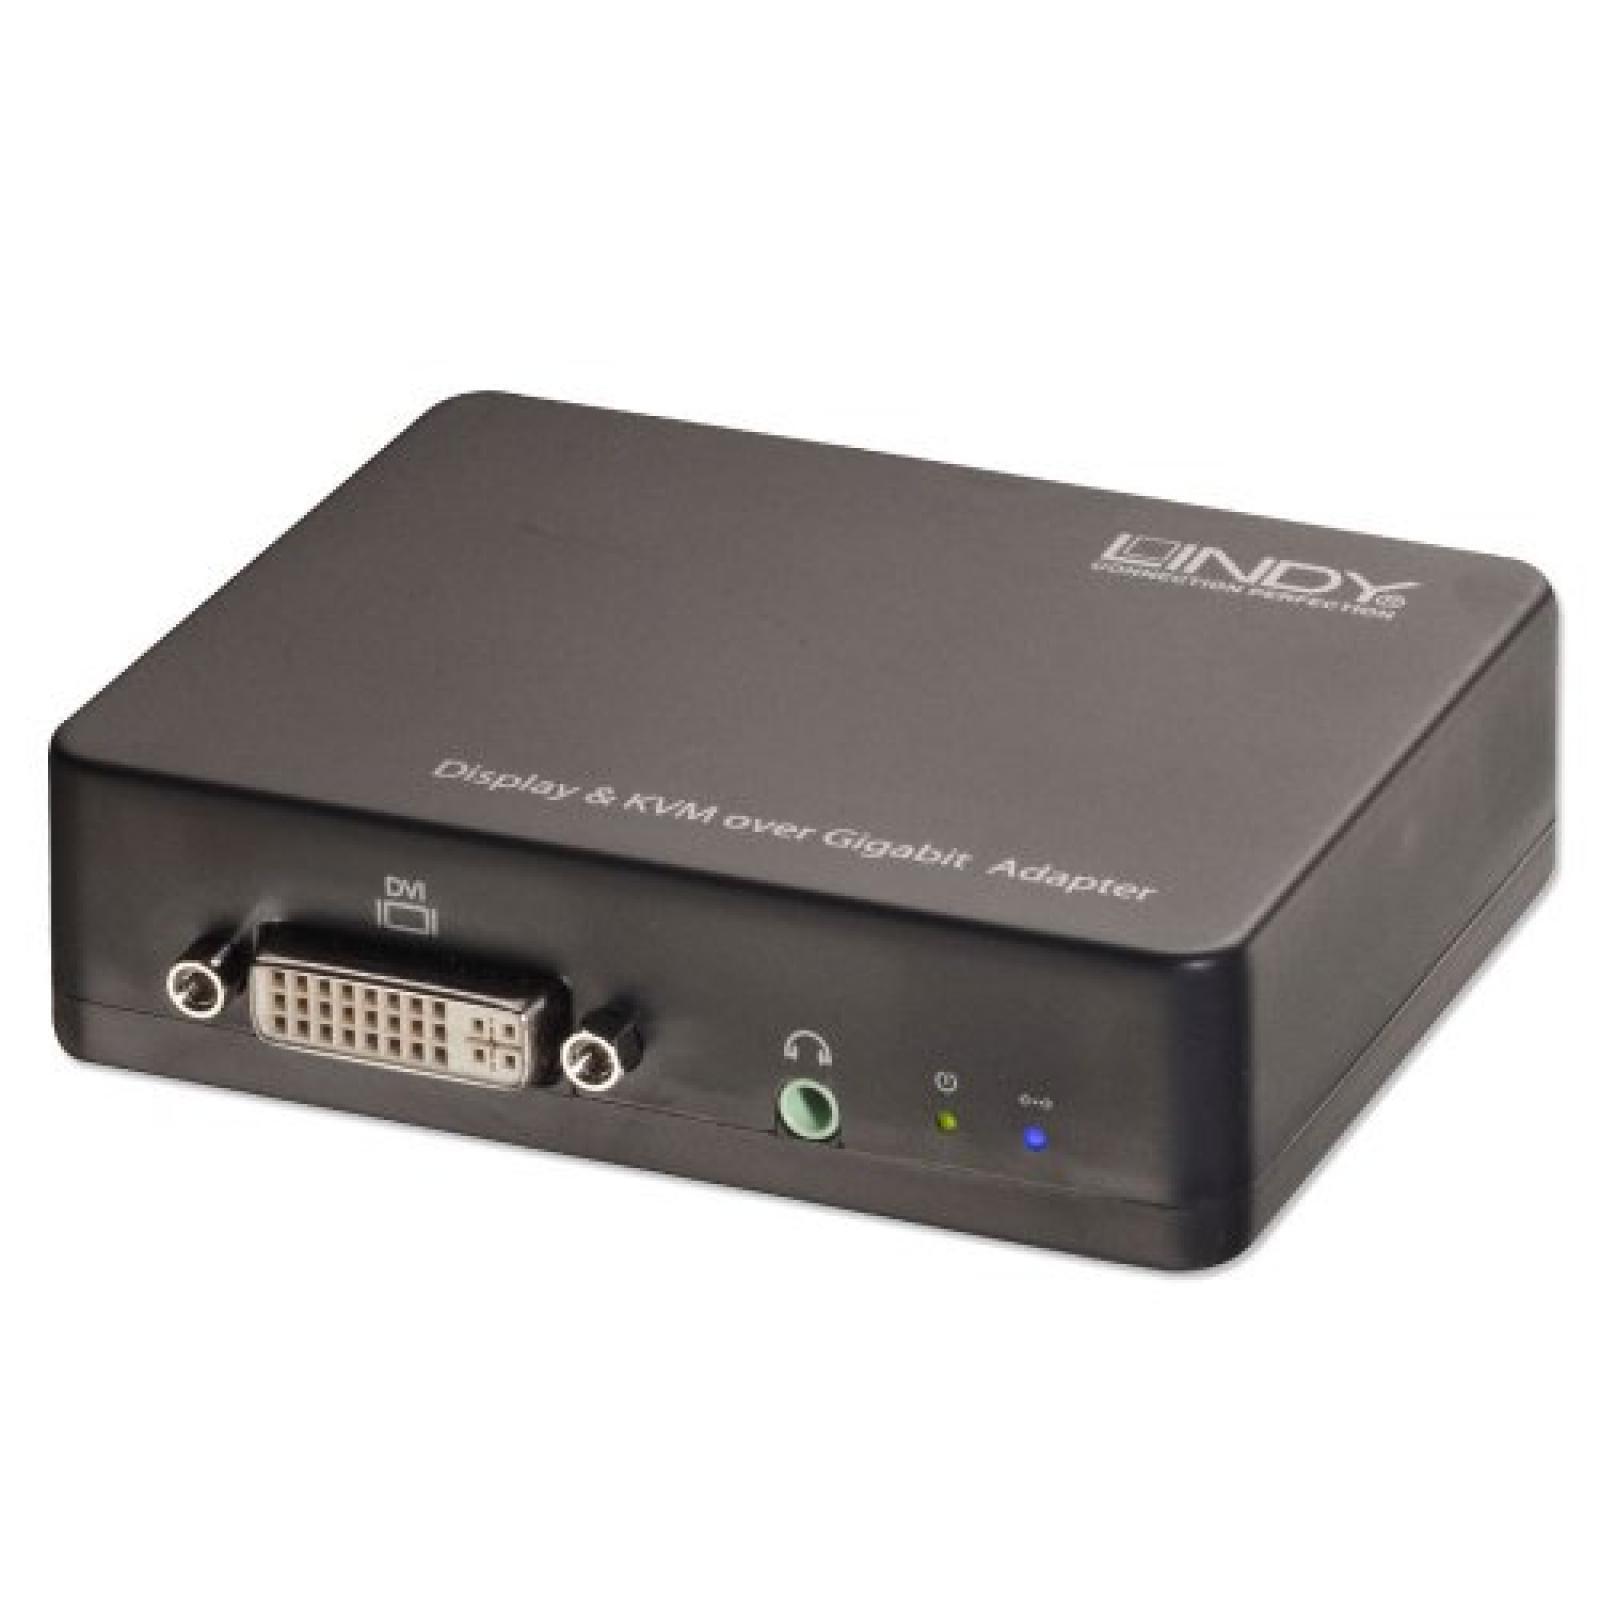 NEW Lindy KVM Gigabit Console Adapter DVI-D and Audio (38083)